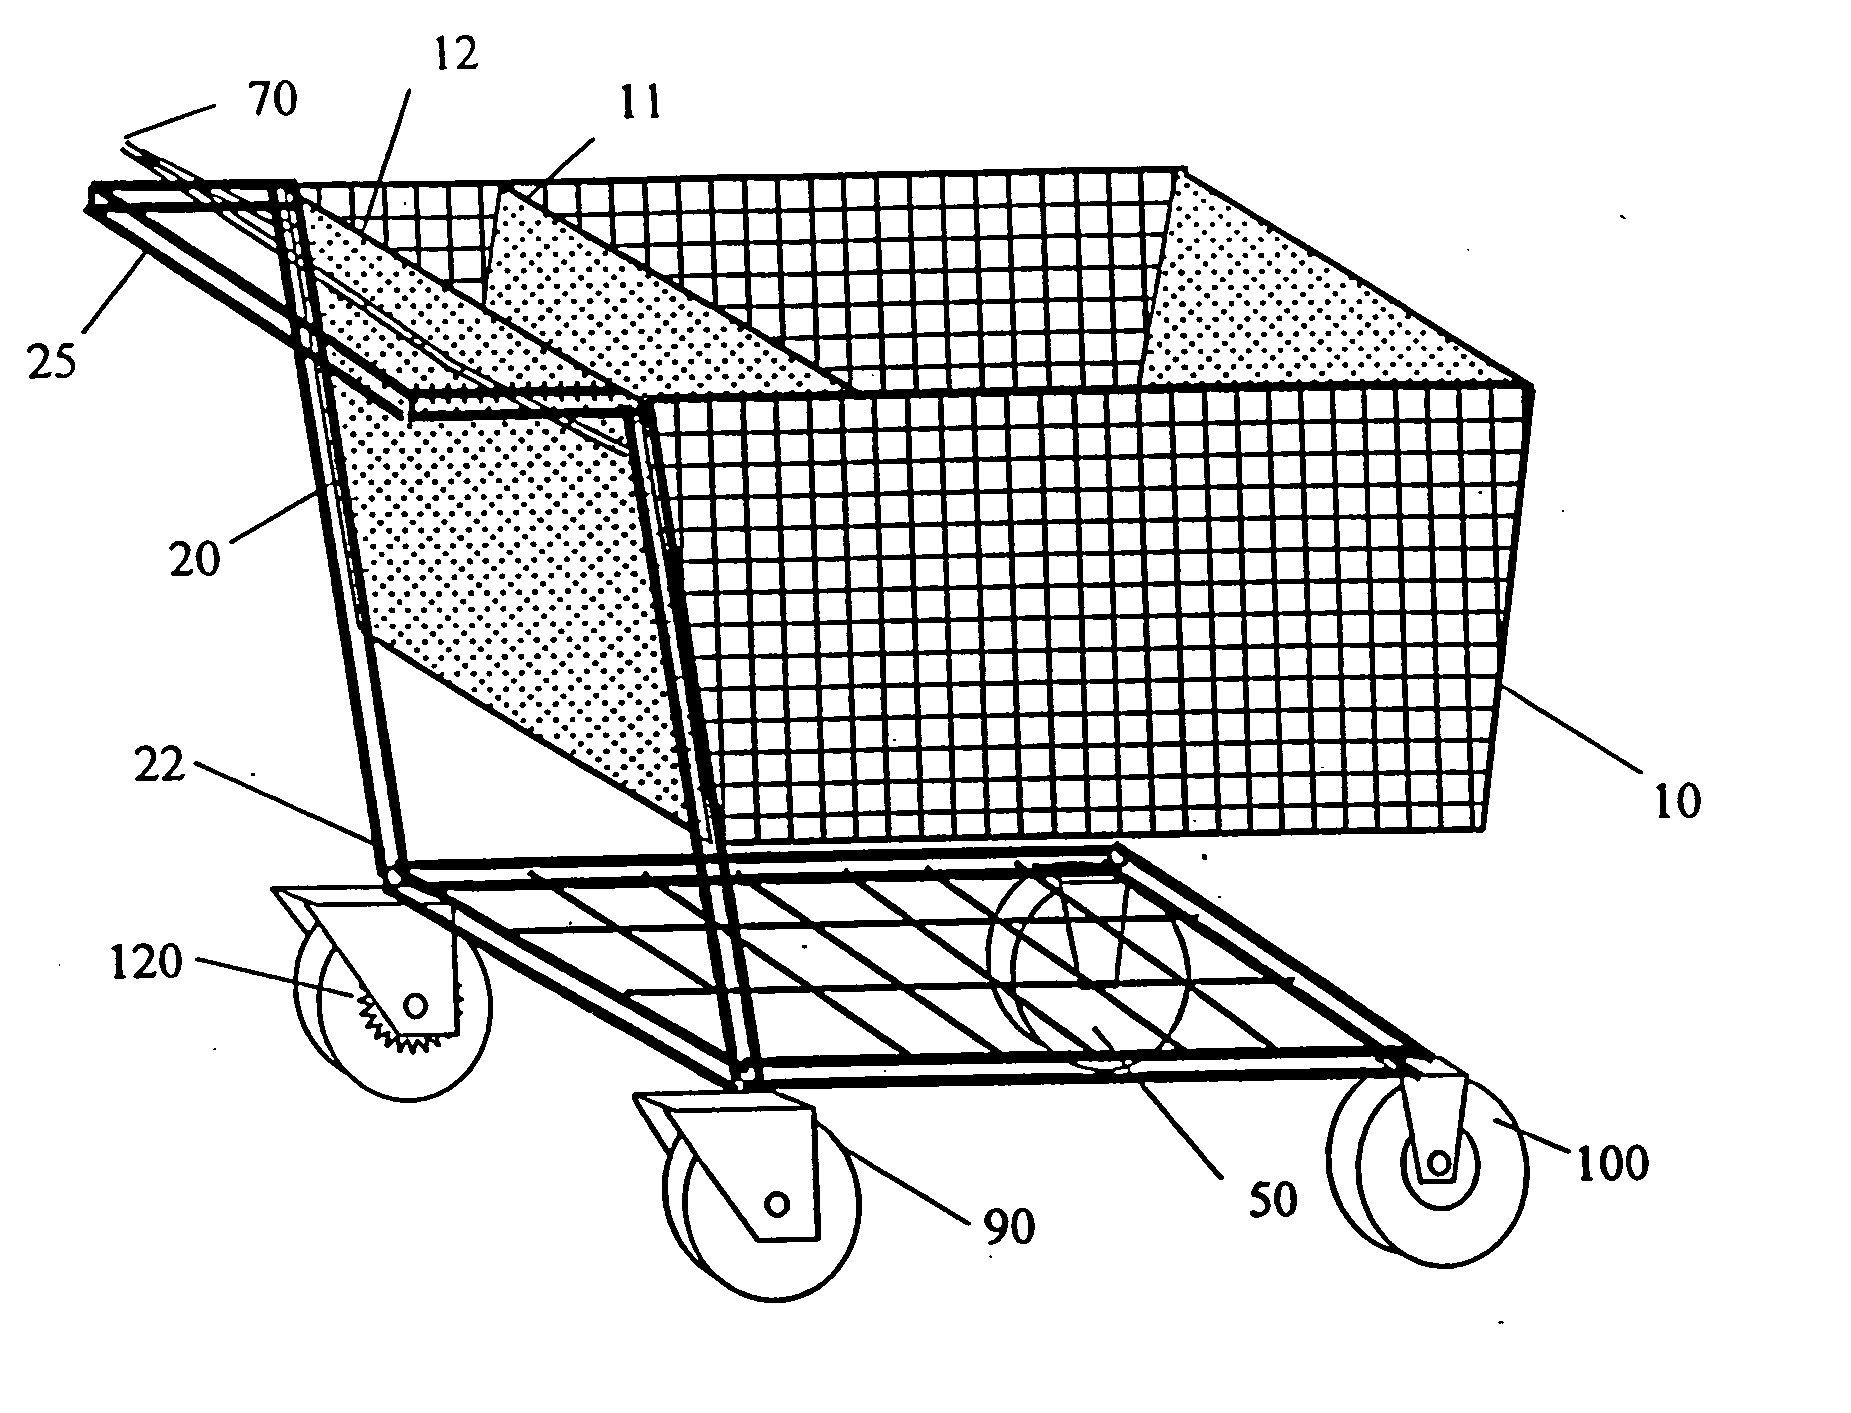 Hand deactivated shopping cart automatic braking system